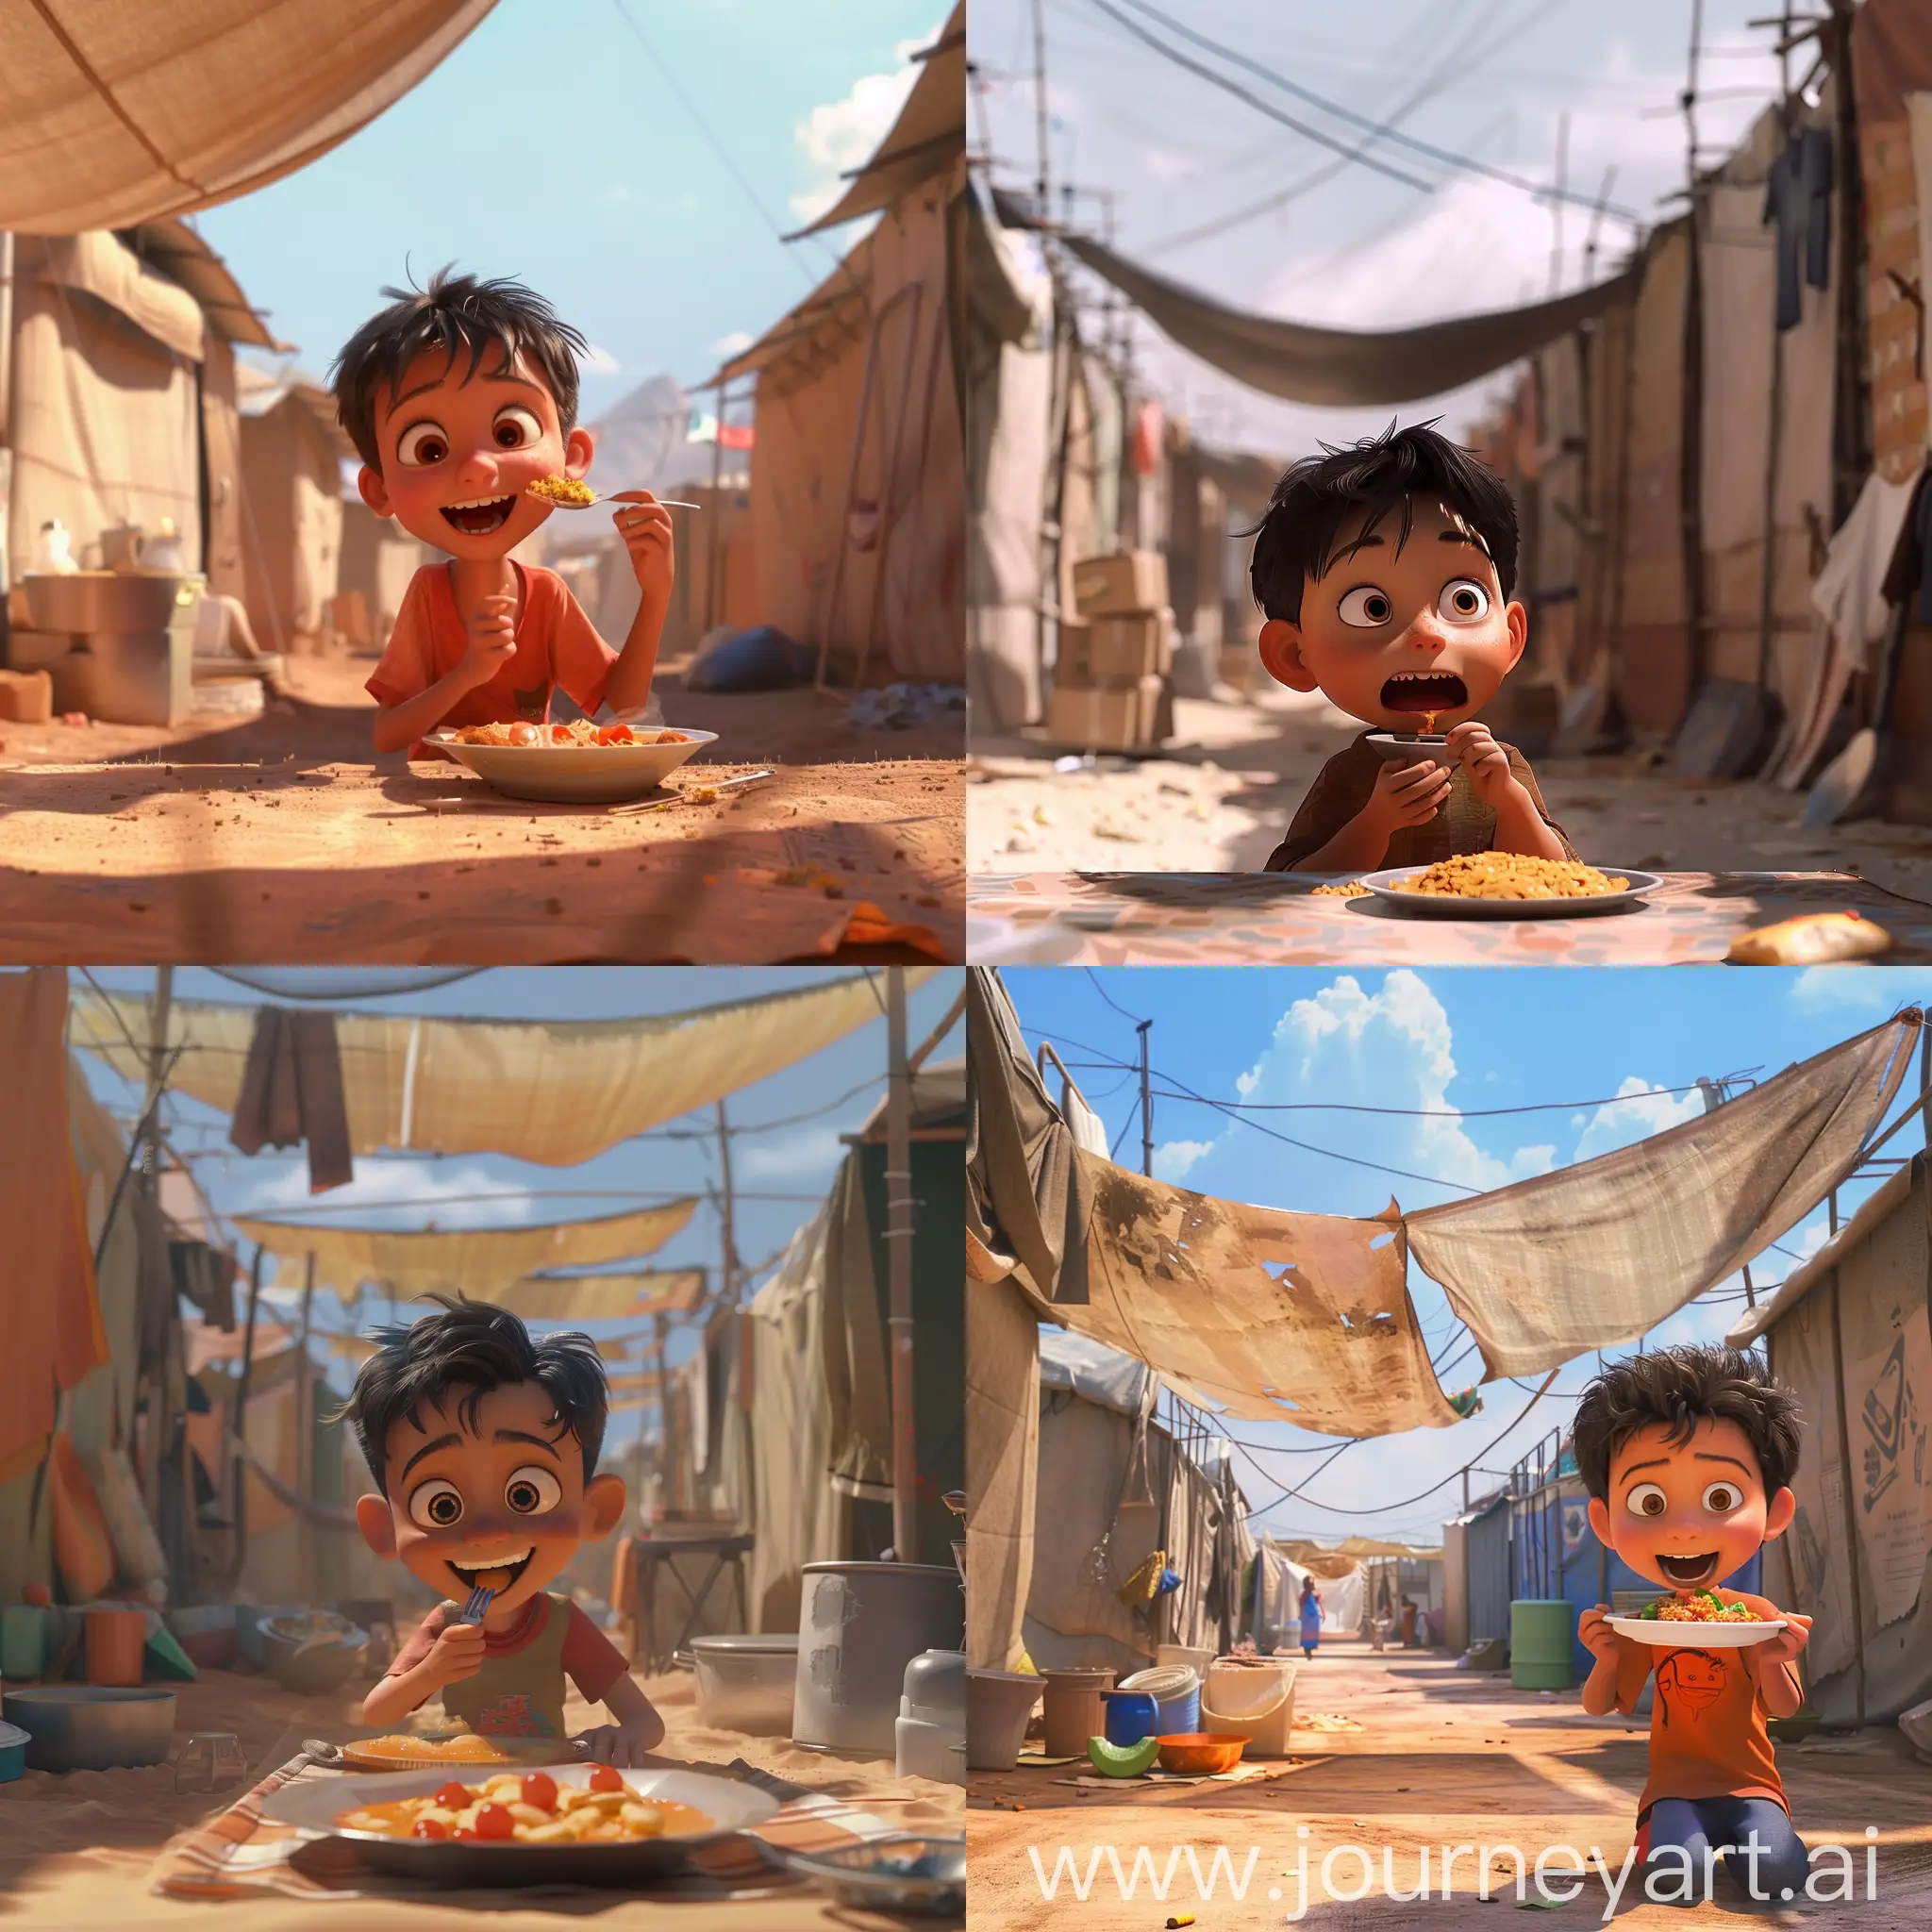 pixar style of kid eat a meal happy in refugee camp